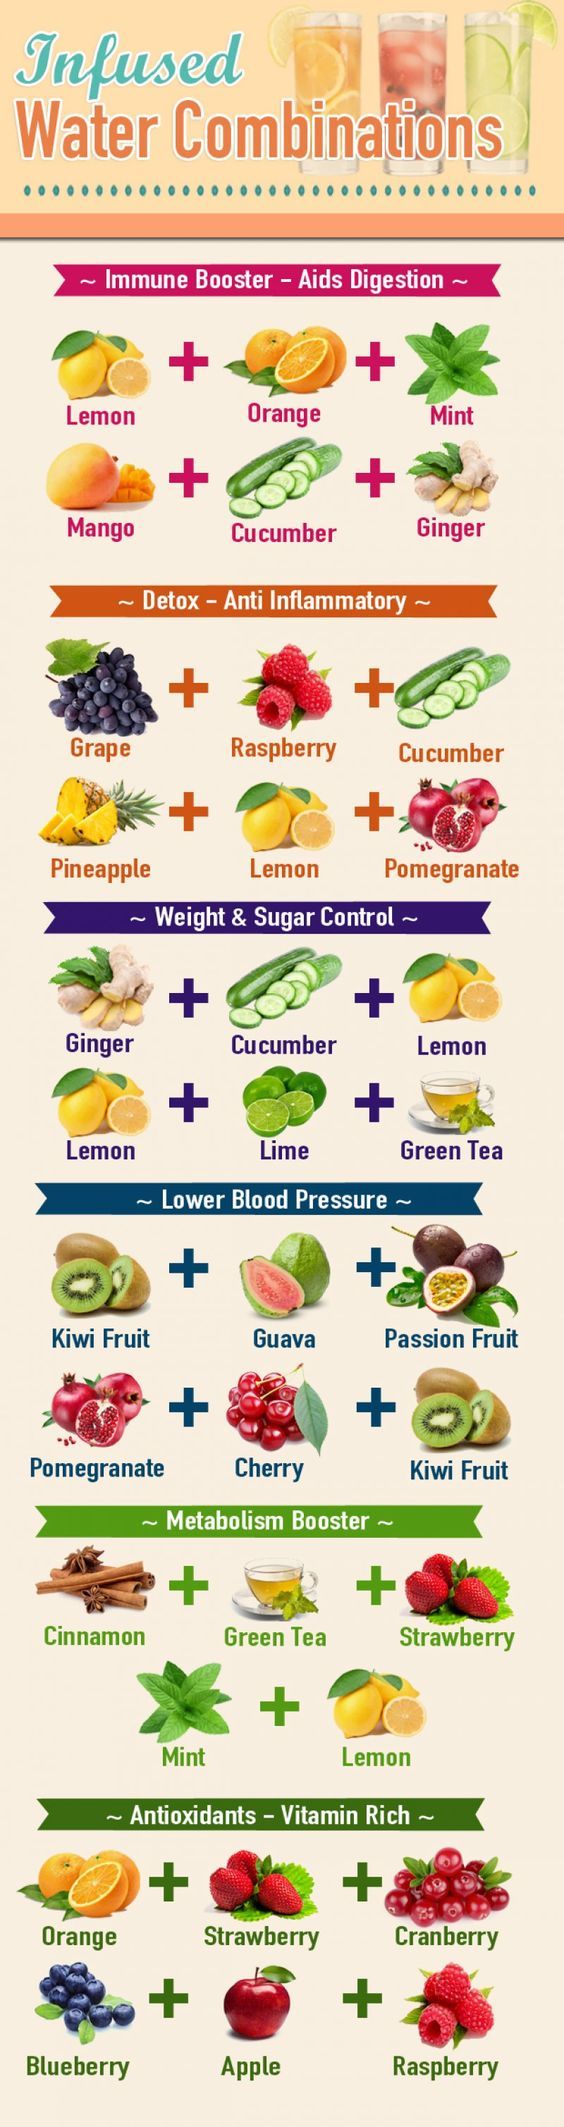 Fruit Infused Water Recipes that will get your day off to a great start!